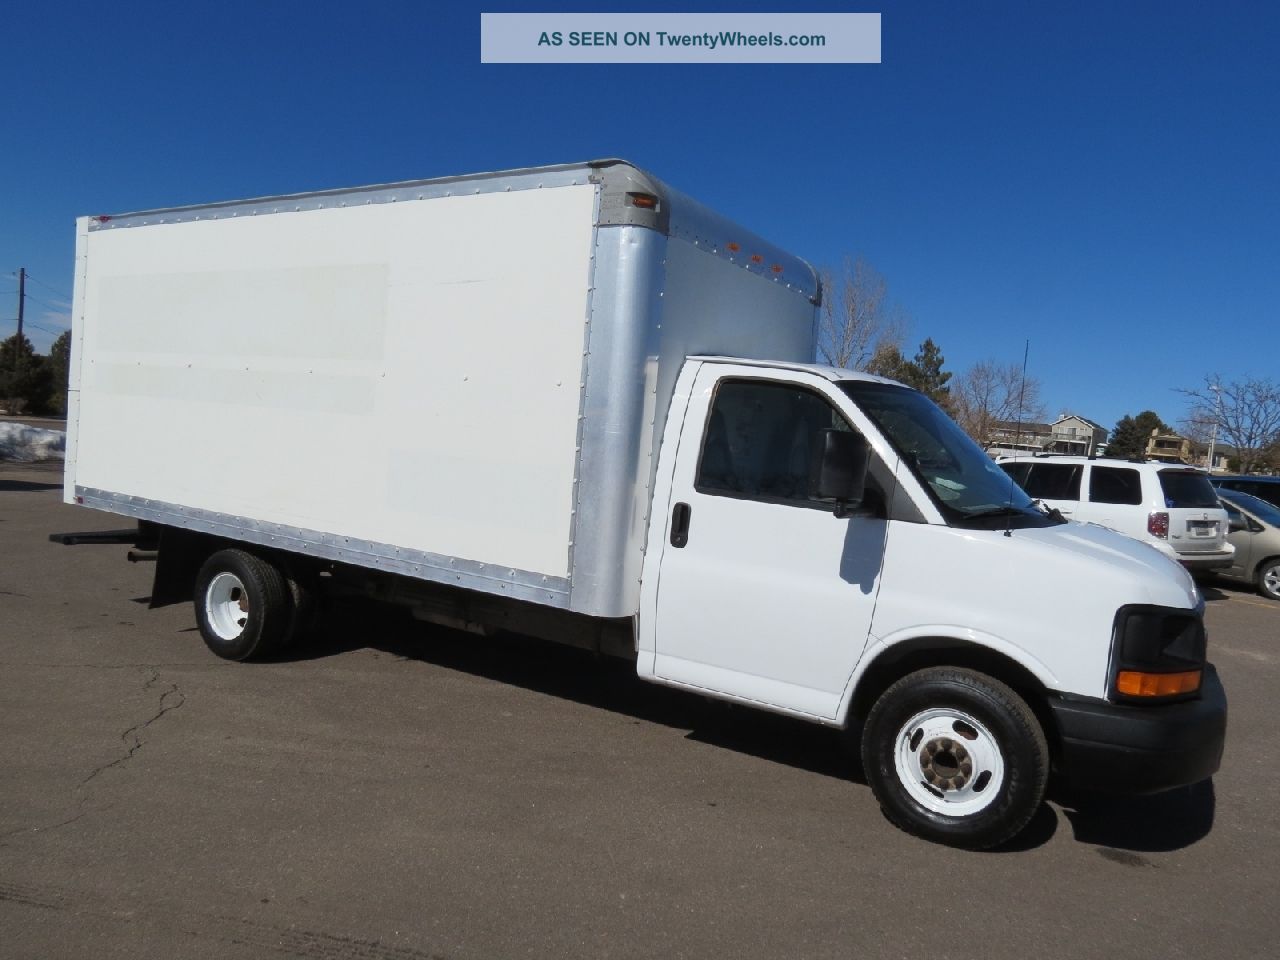 2005 Gmc Savana Express 3500 Delivery Moving Van Serviced Delivery / Cargo Vans photo